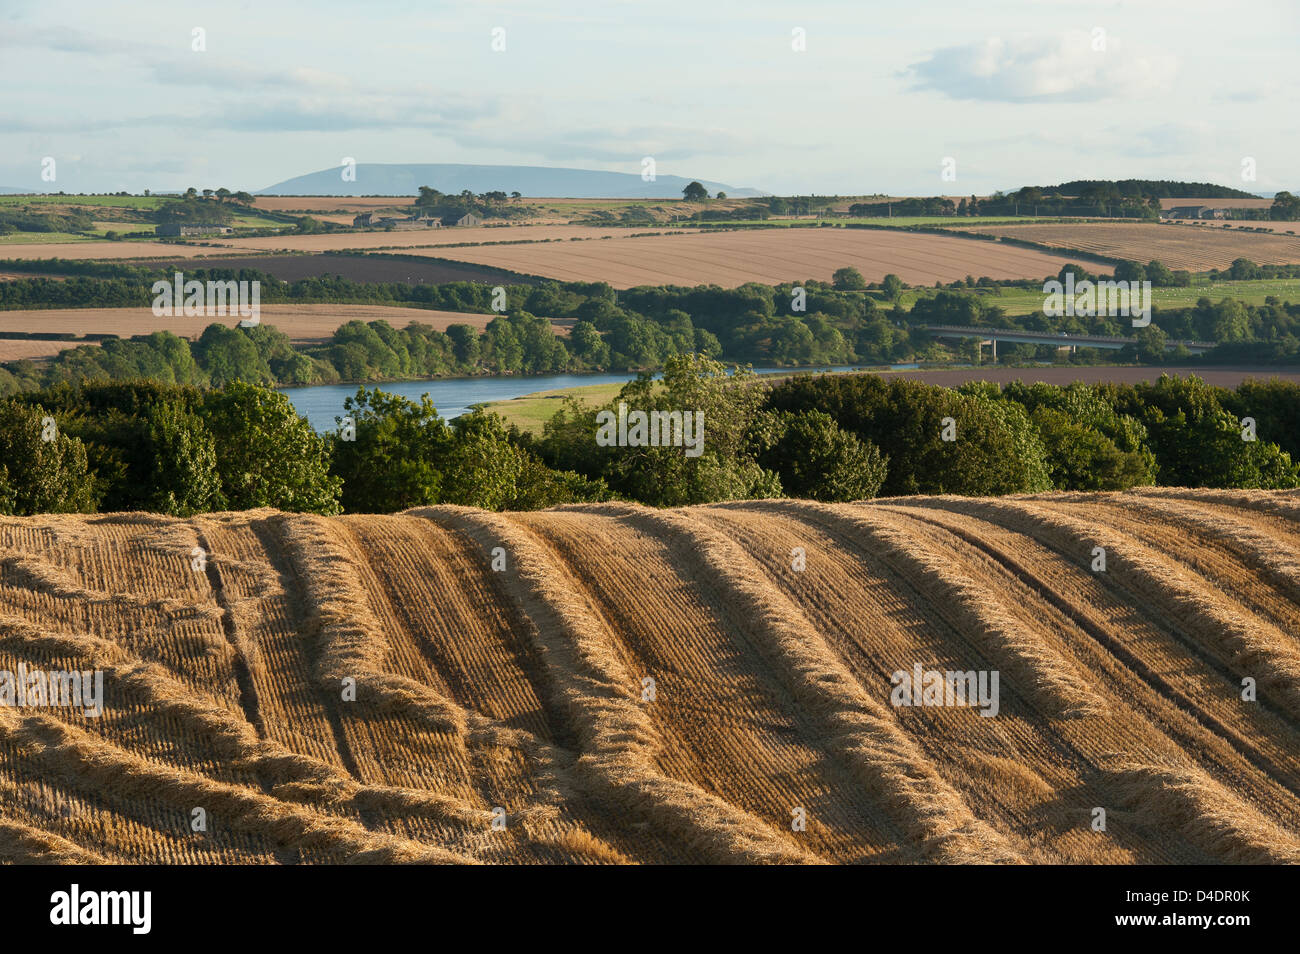 Beautiful view of a freshly harvested crop field in the English countryside. Stock Photo